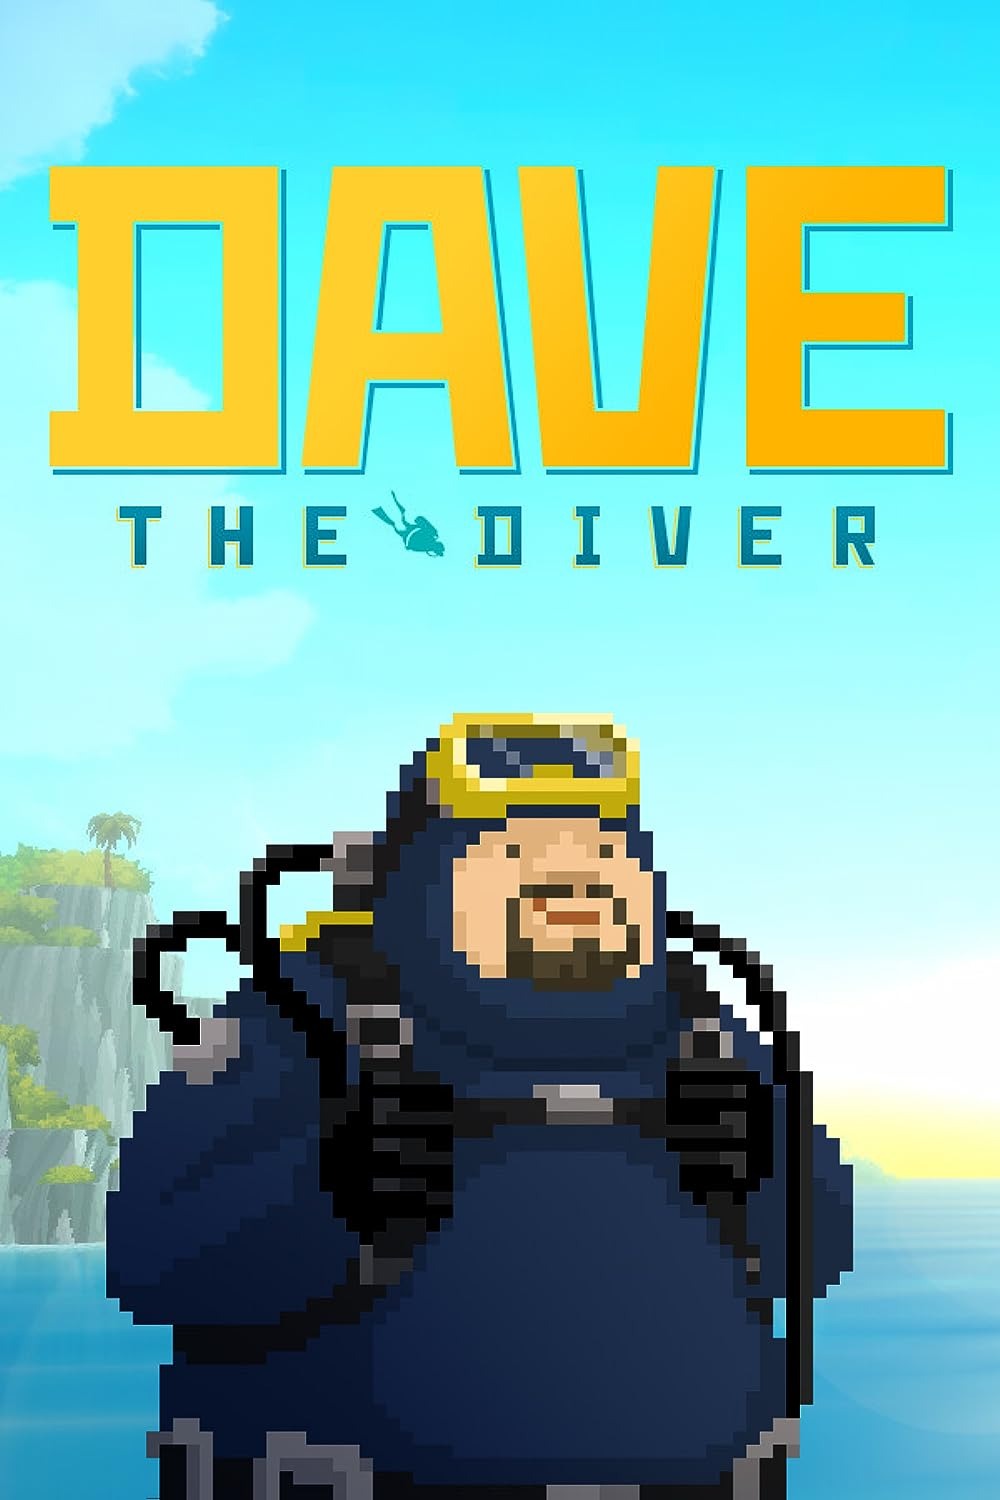 Dave the Diver (PC/Steam Digital Download) $15